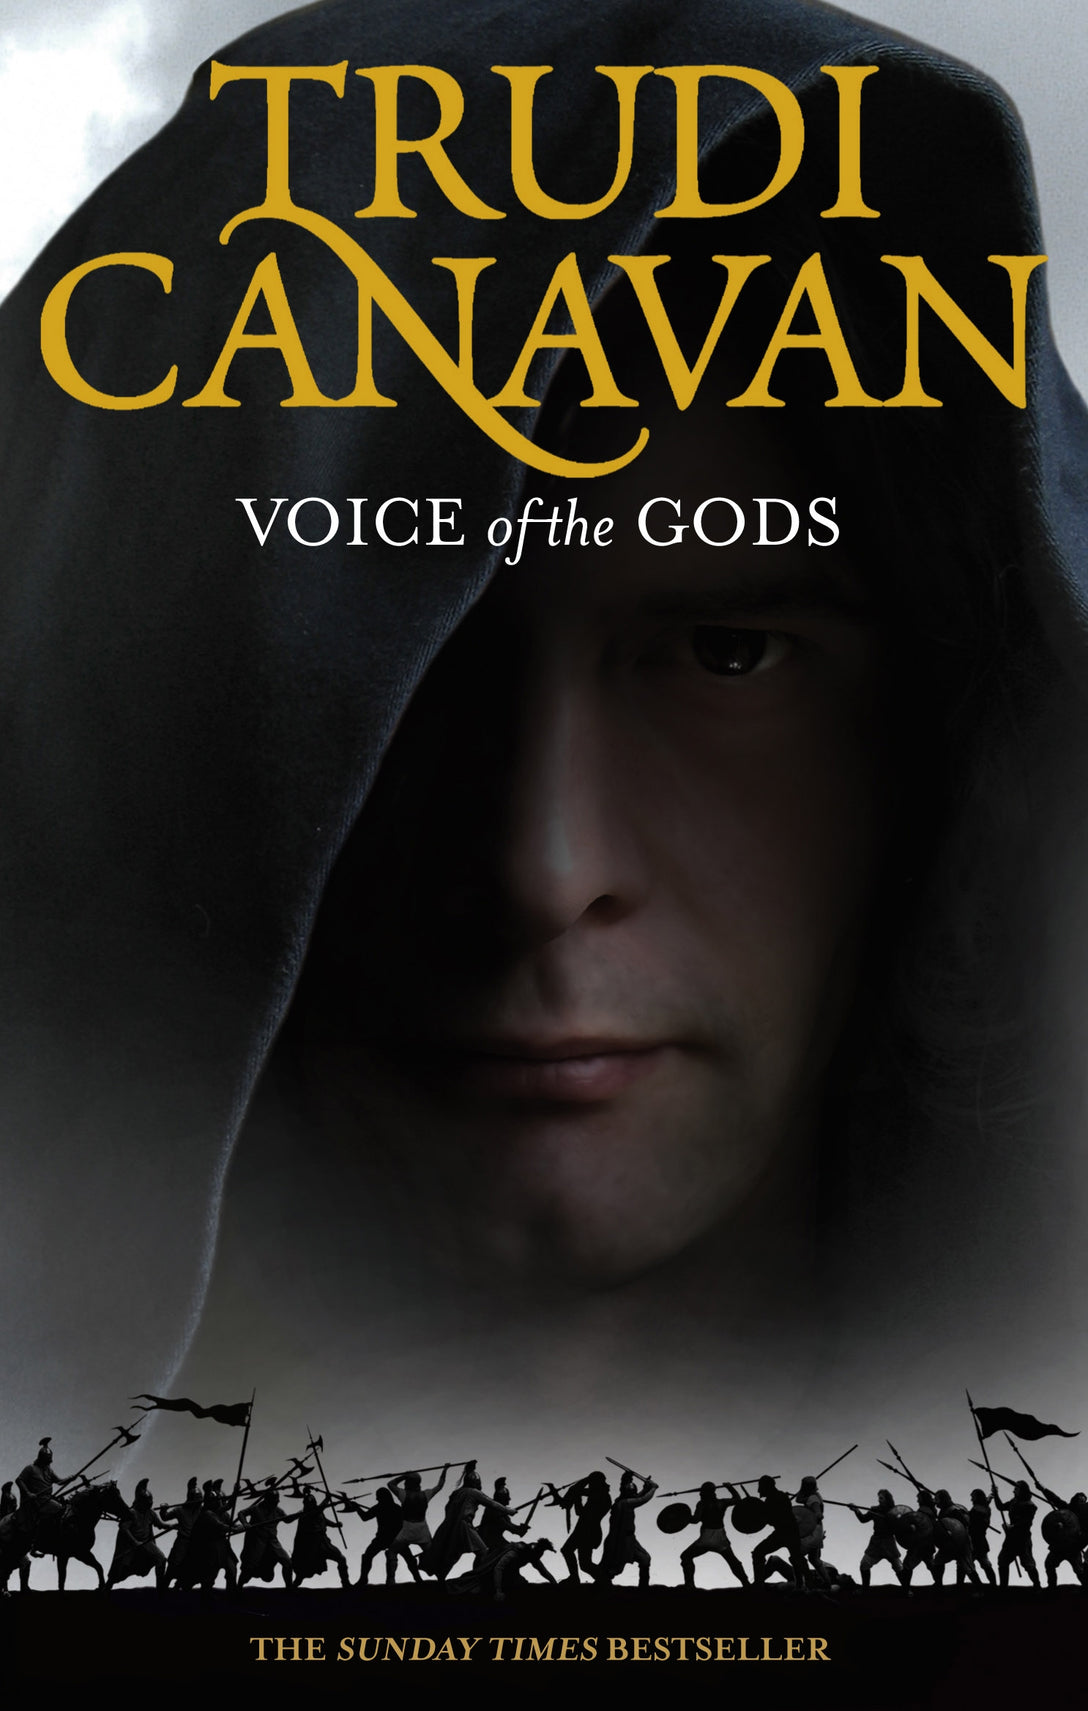 Voice Of The Gods by Trudi Canavan